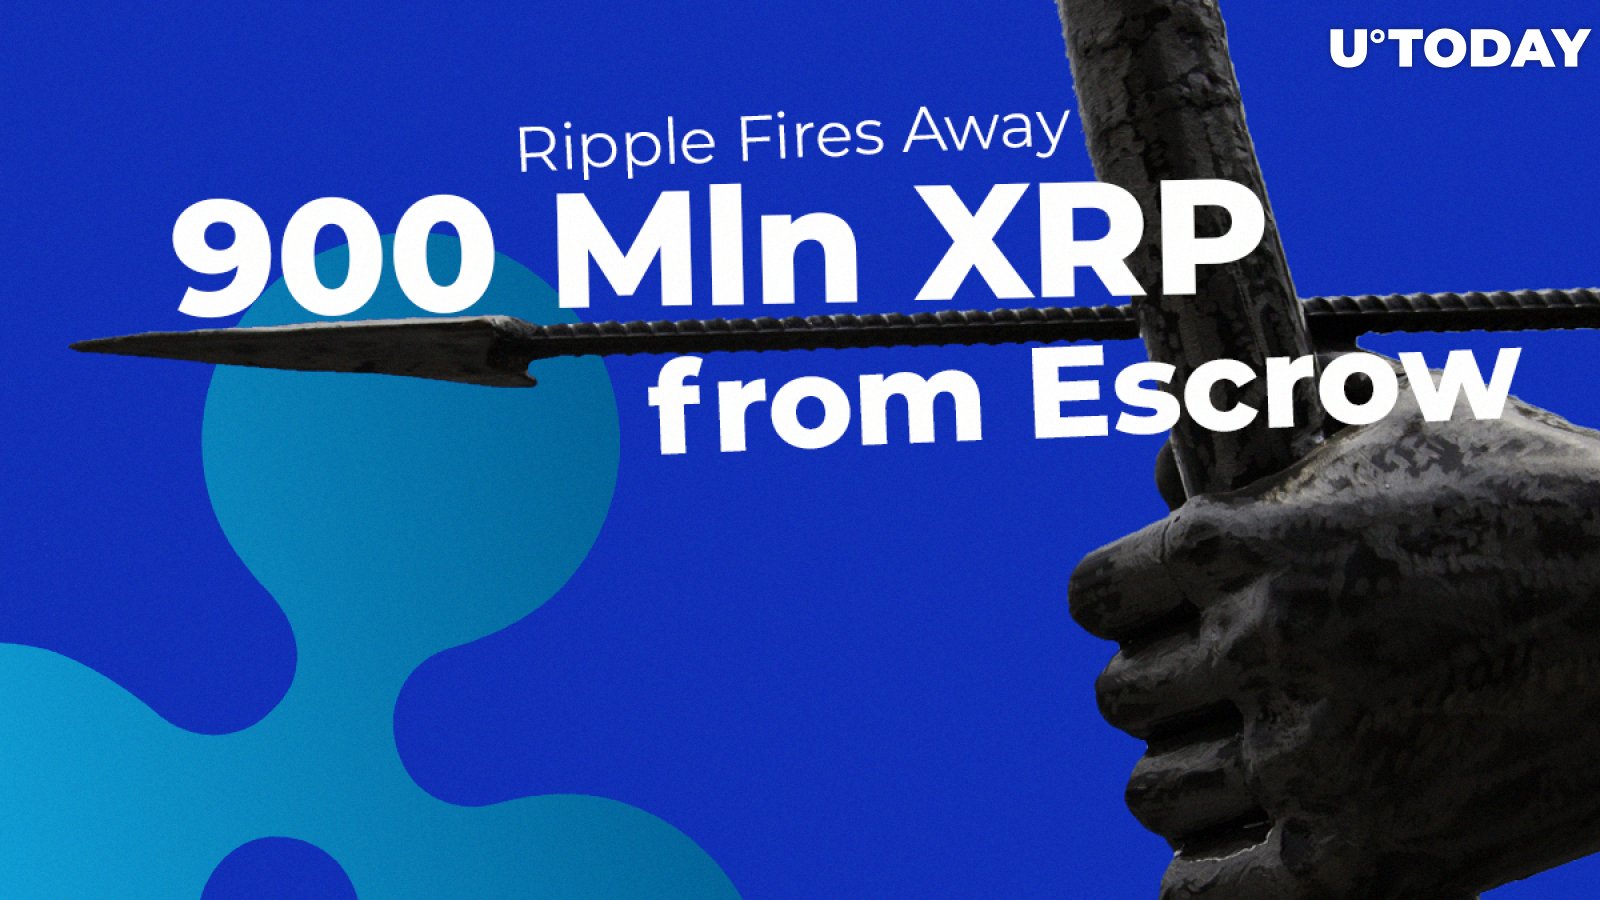 Ripple Fires off 900 Mln XRP From Escrow – Shortly After Releasing 1 Bln XRP